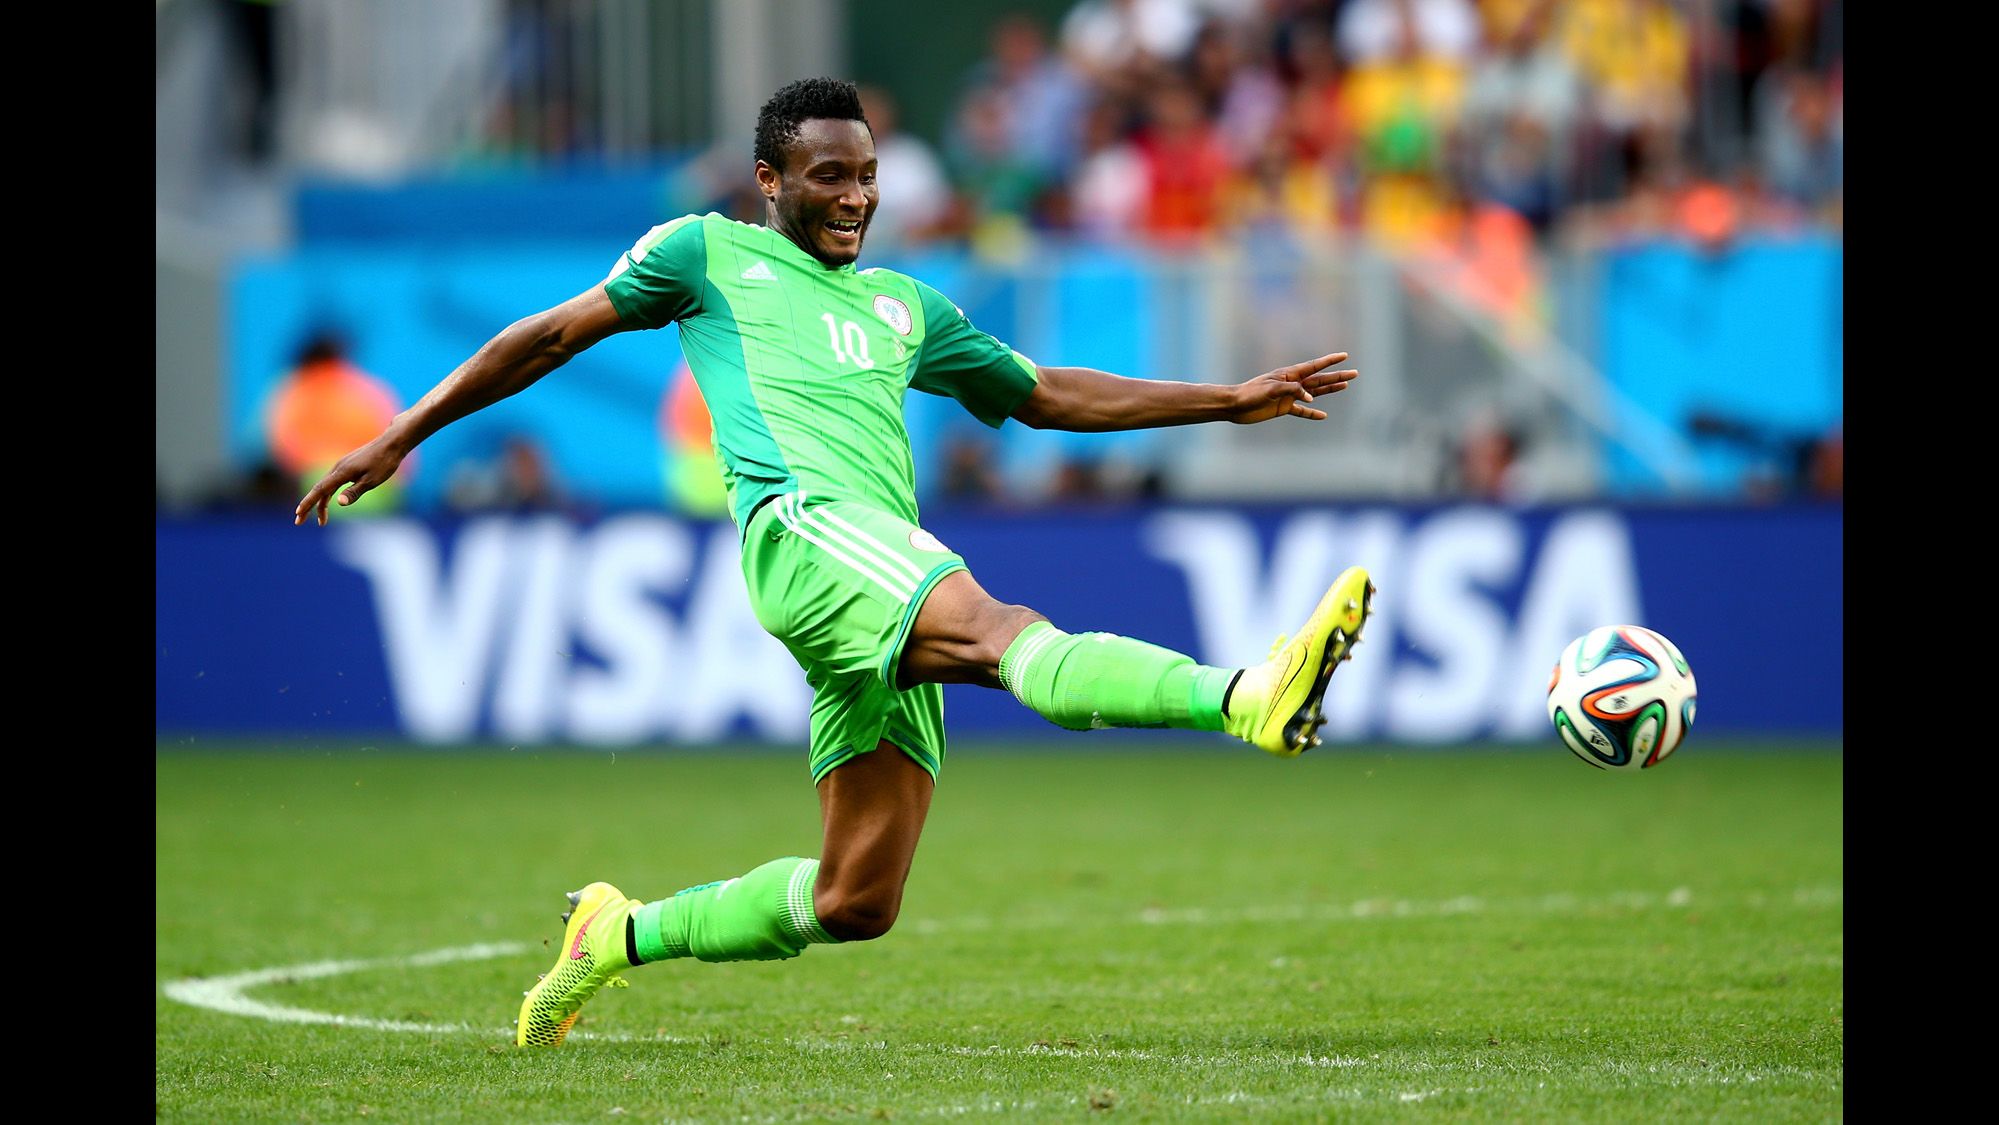 John Obi Mikel of Nigeria in action during the 2014 FIFA World Cup Brazil Round of 16. His team will rush to Brazil this week for the Olympics.